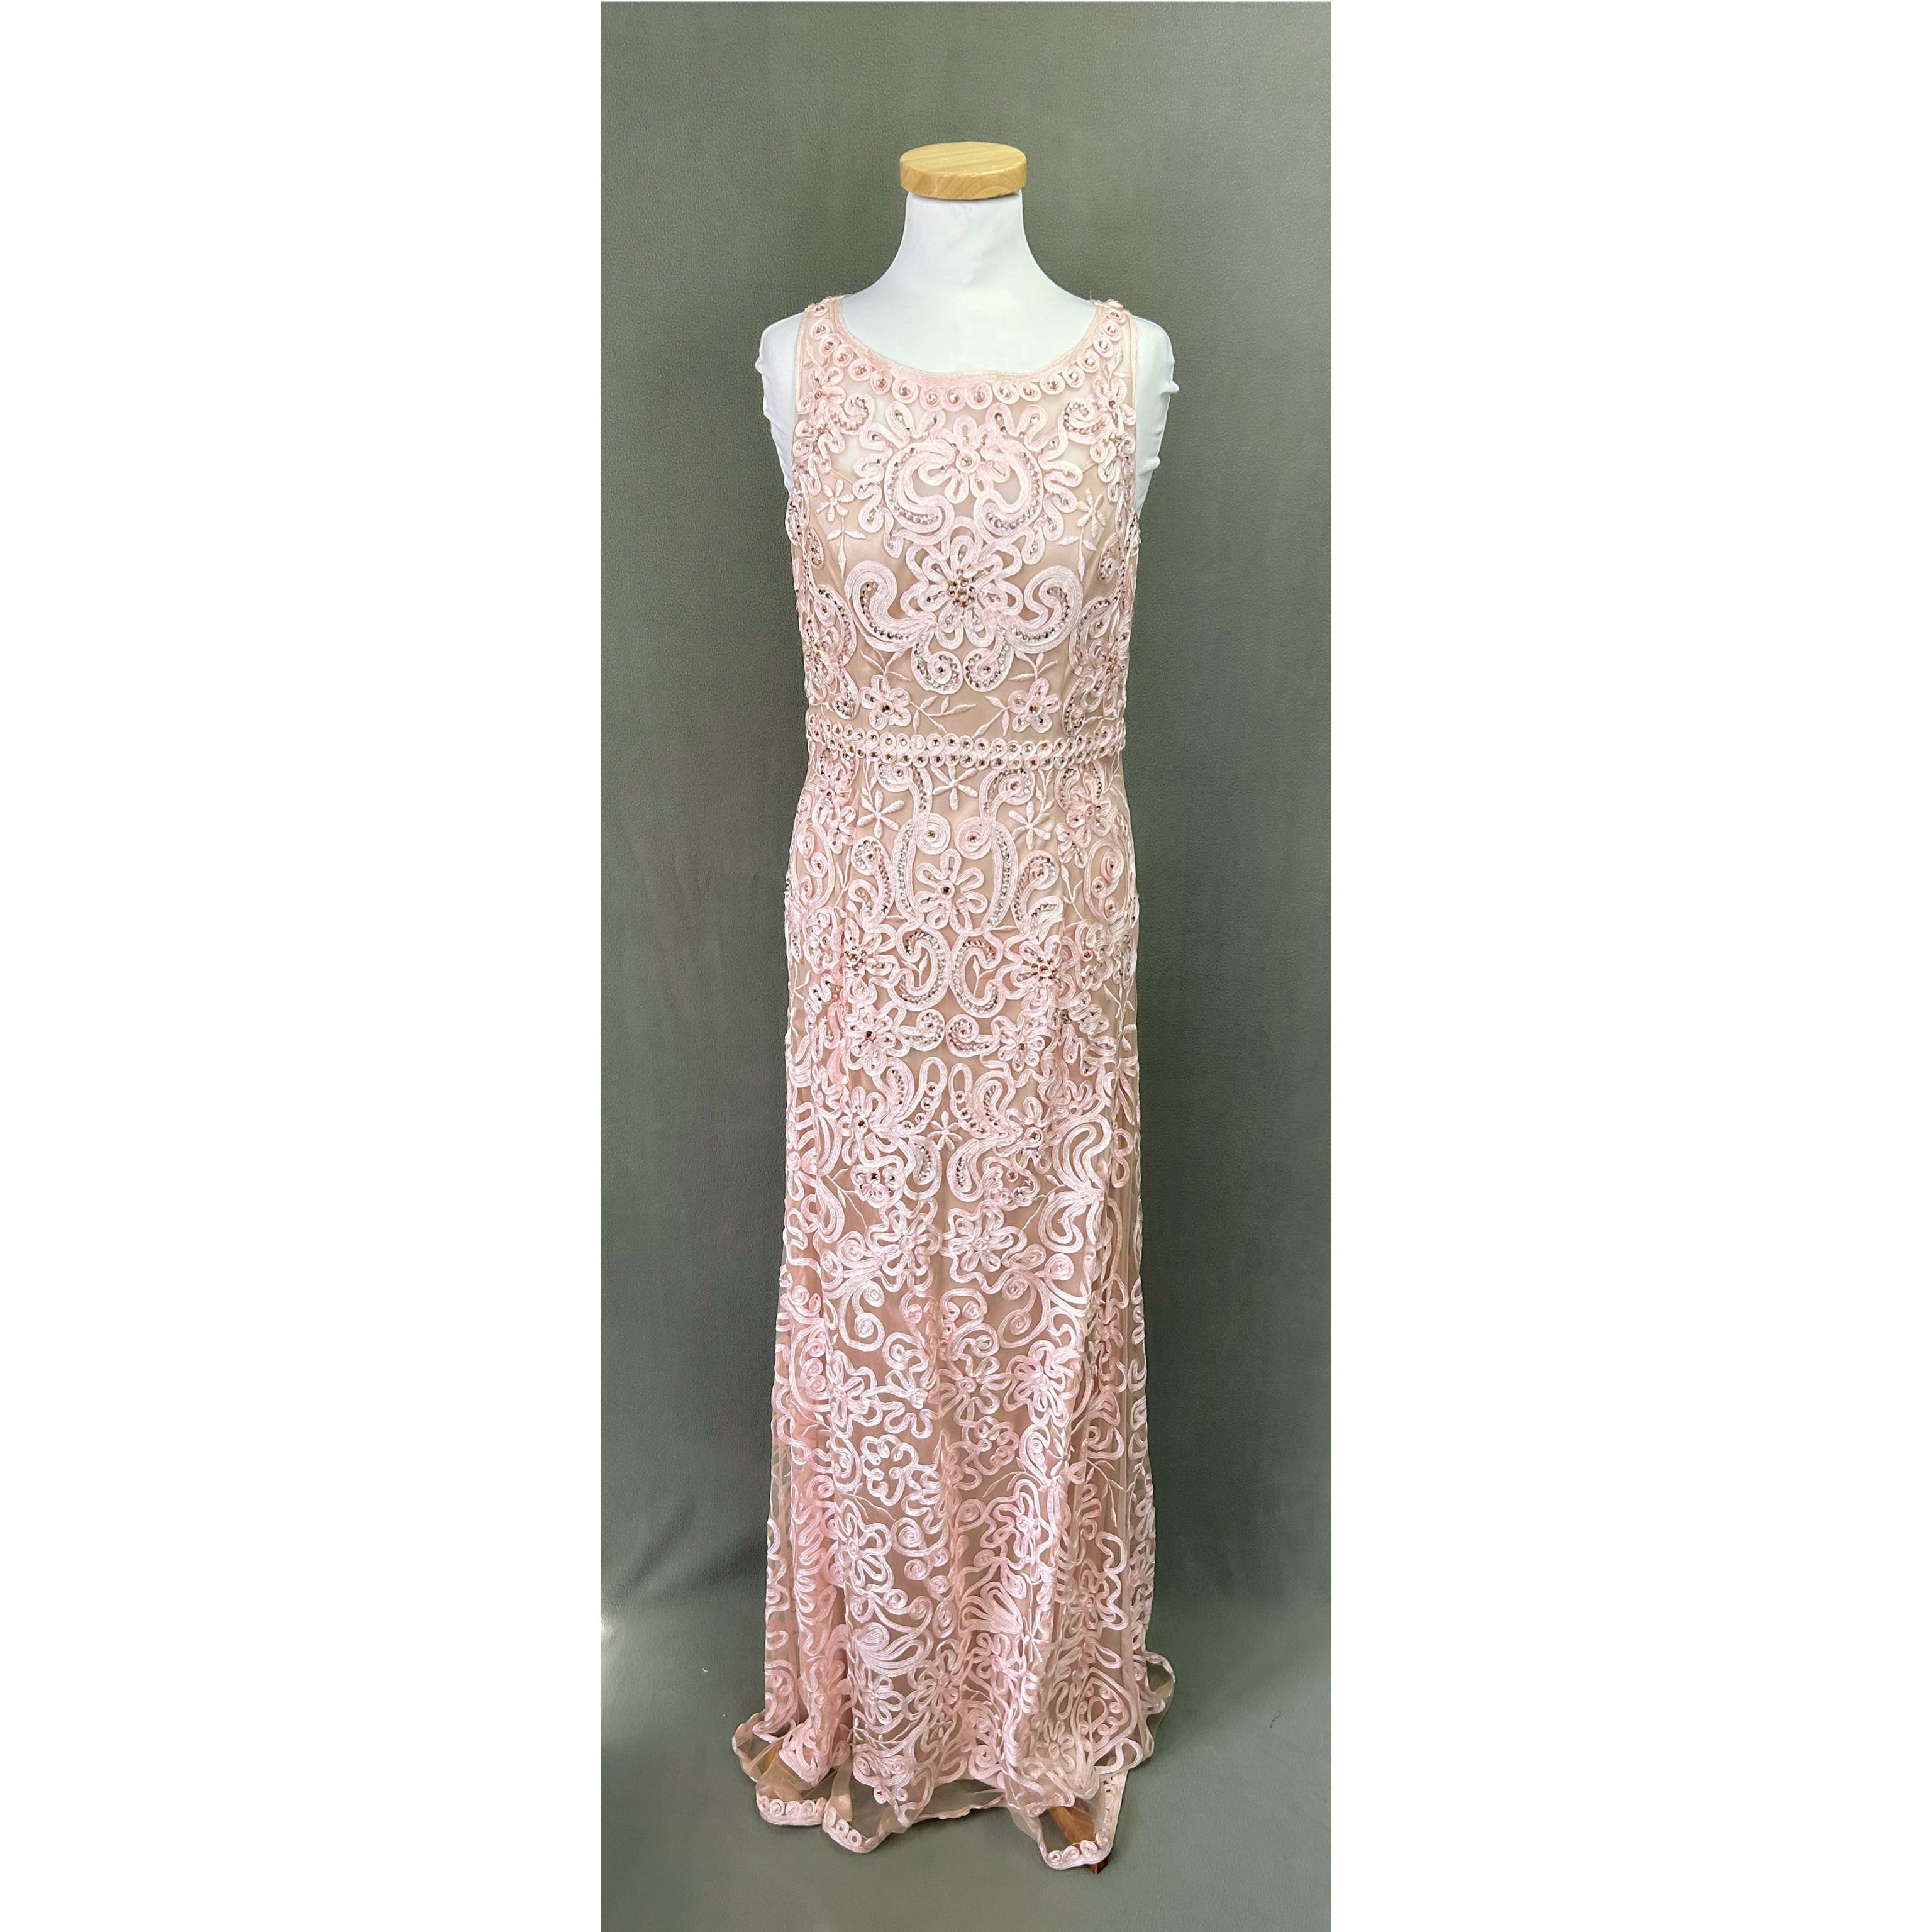 Cameron Blake petal pink dress, size 10, NEW WITH TAGS!